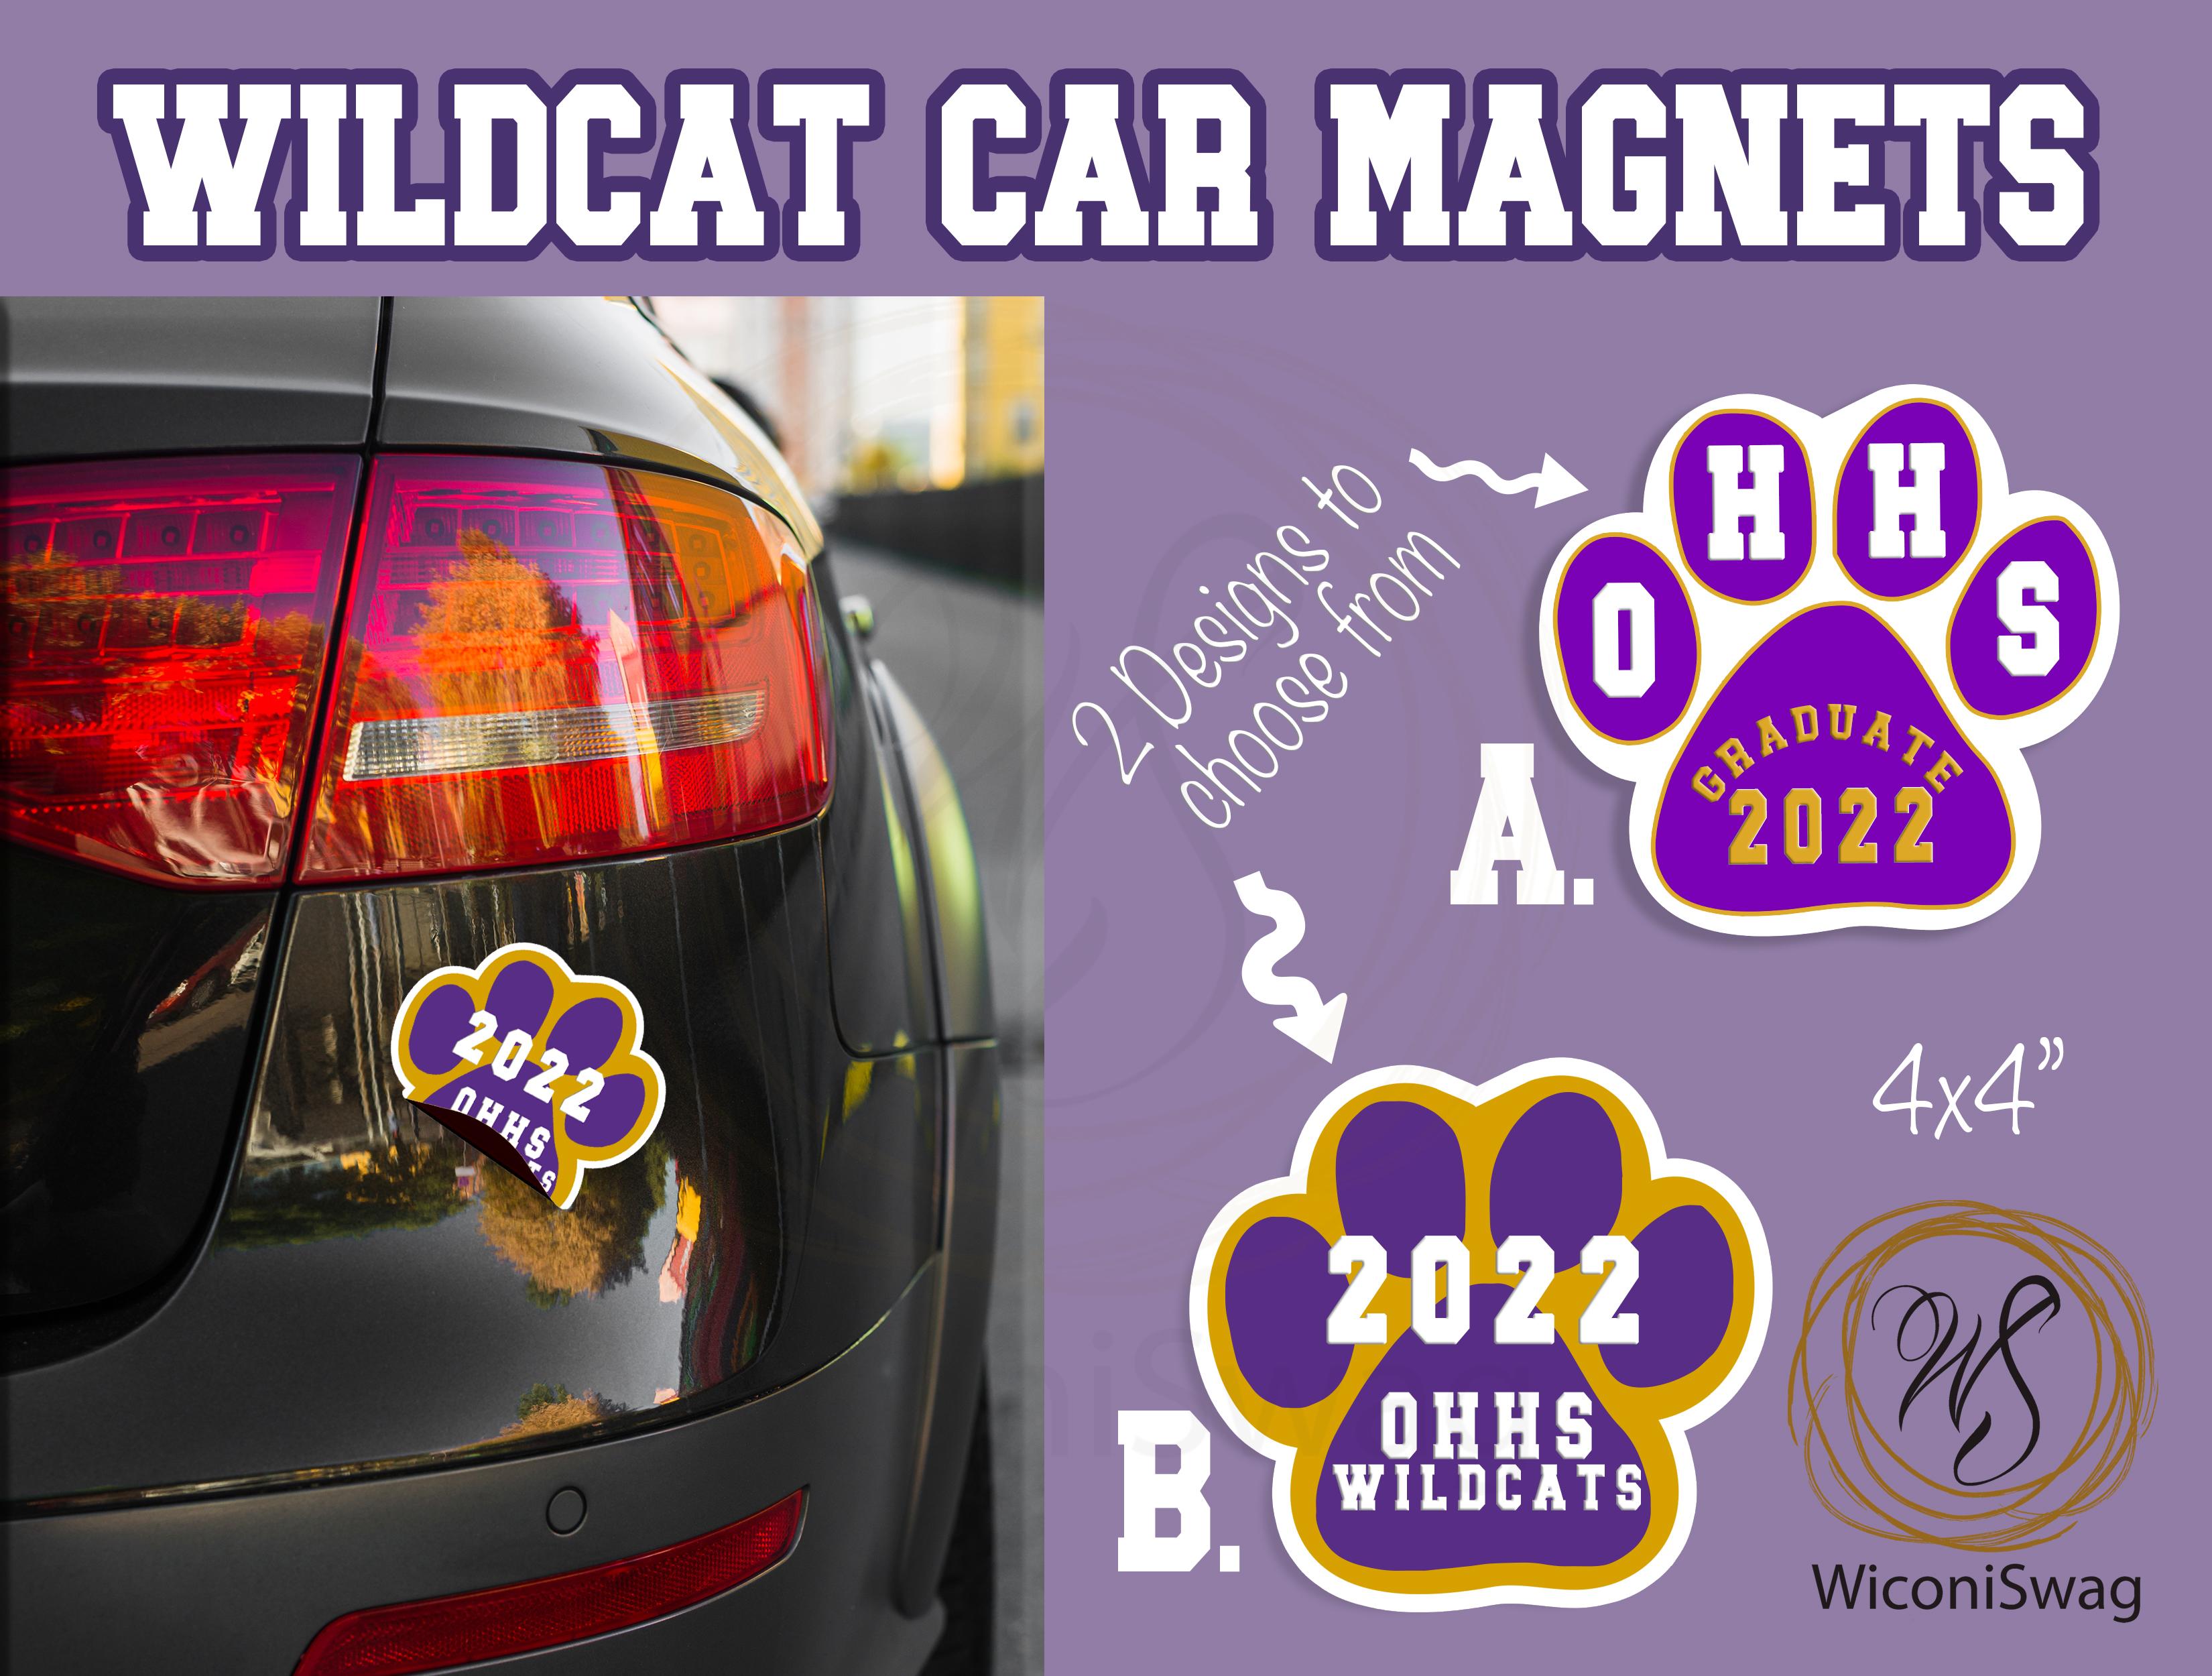 class of 2022, magnet, car, clearance, limited stock